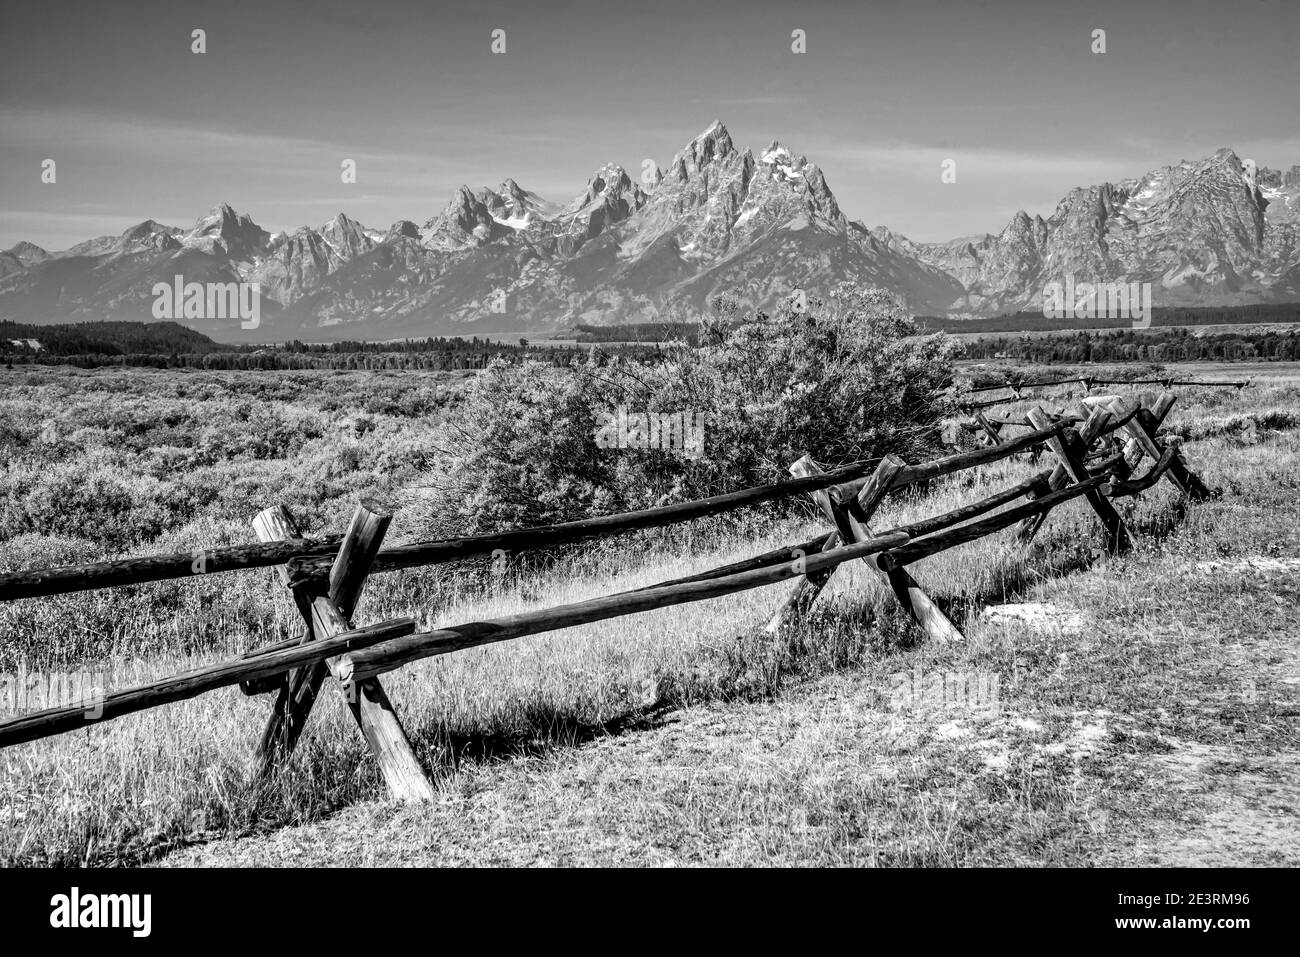 United States. The fabulous mountains of Grand Teton in monochrome in the Grand Teton National Park near Jackson, Wyoming in the United States. Seen here with the Buck and Rail fencing at Cunningham Cabin on the Antelope Flats that featured in the award winning western film SHANE that starred Alan Ladd. Stock Photo